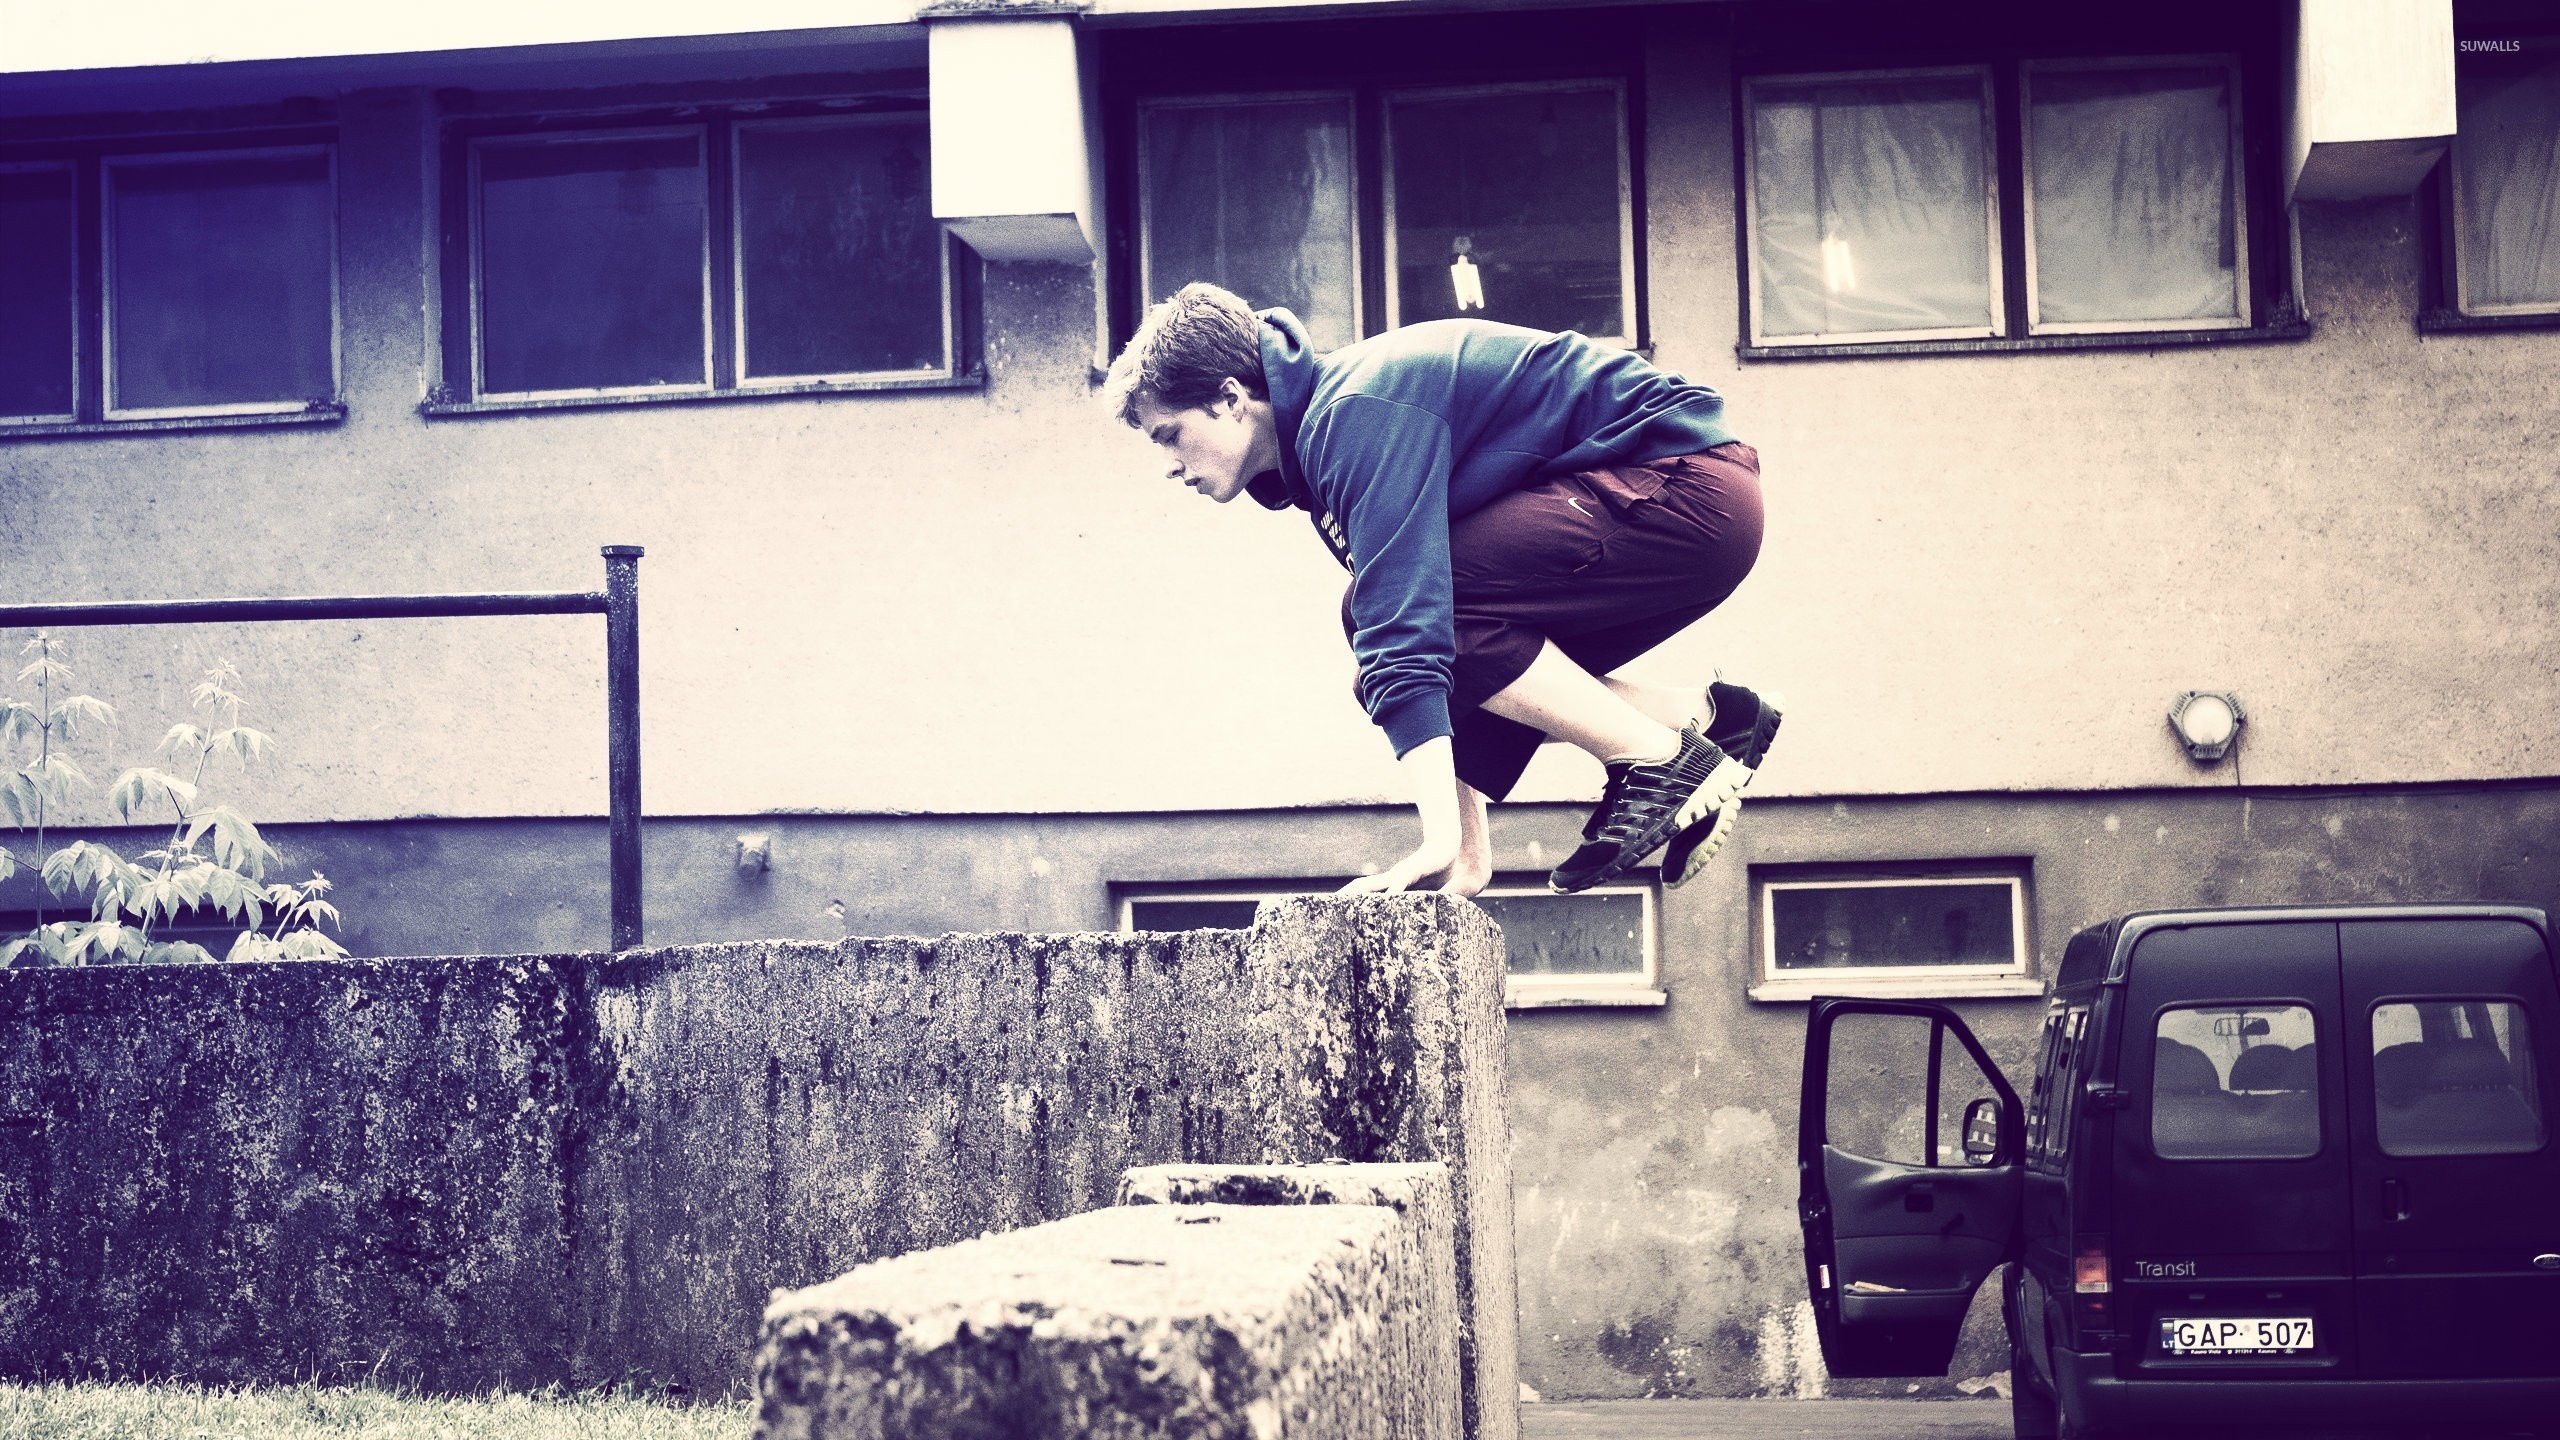 Parkour: Safety step and speed vault style, Jumping in military obstacle course. 2560x1440 HD Wallpaper.